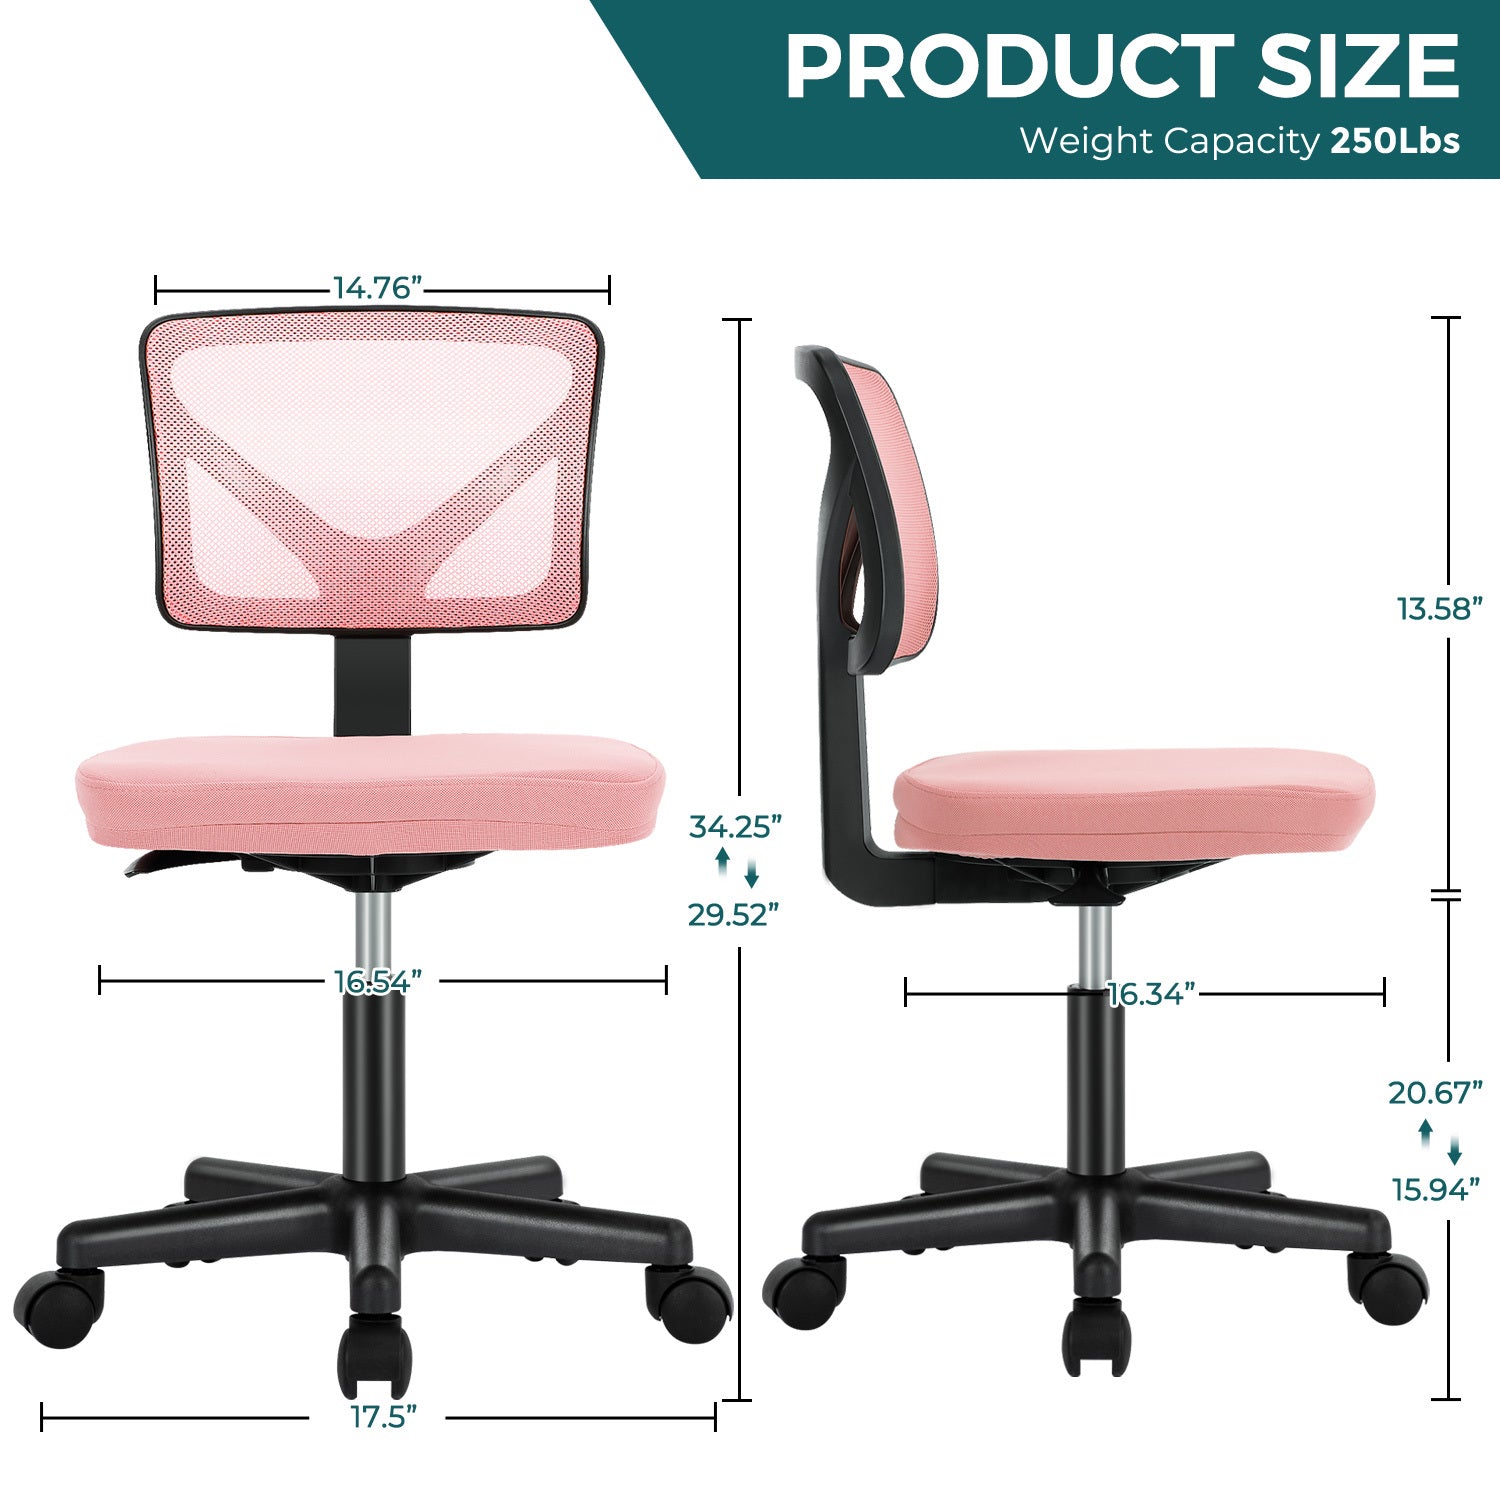 Sweetcrispy Armless Desk Chair Small Home Office Chair pink-nylon mesh